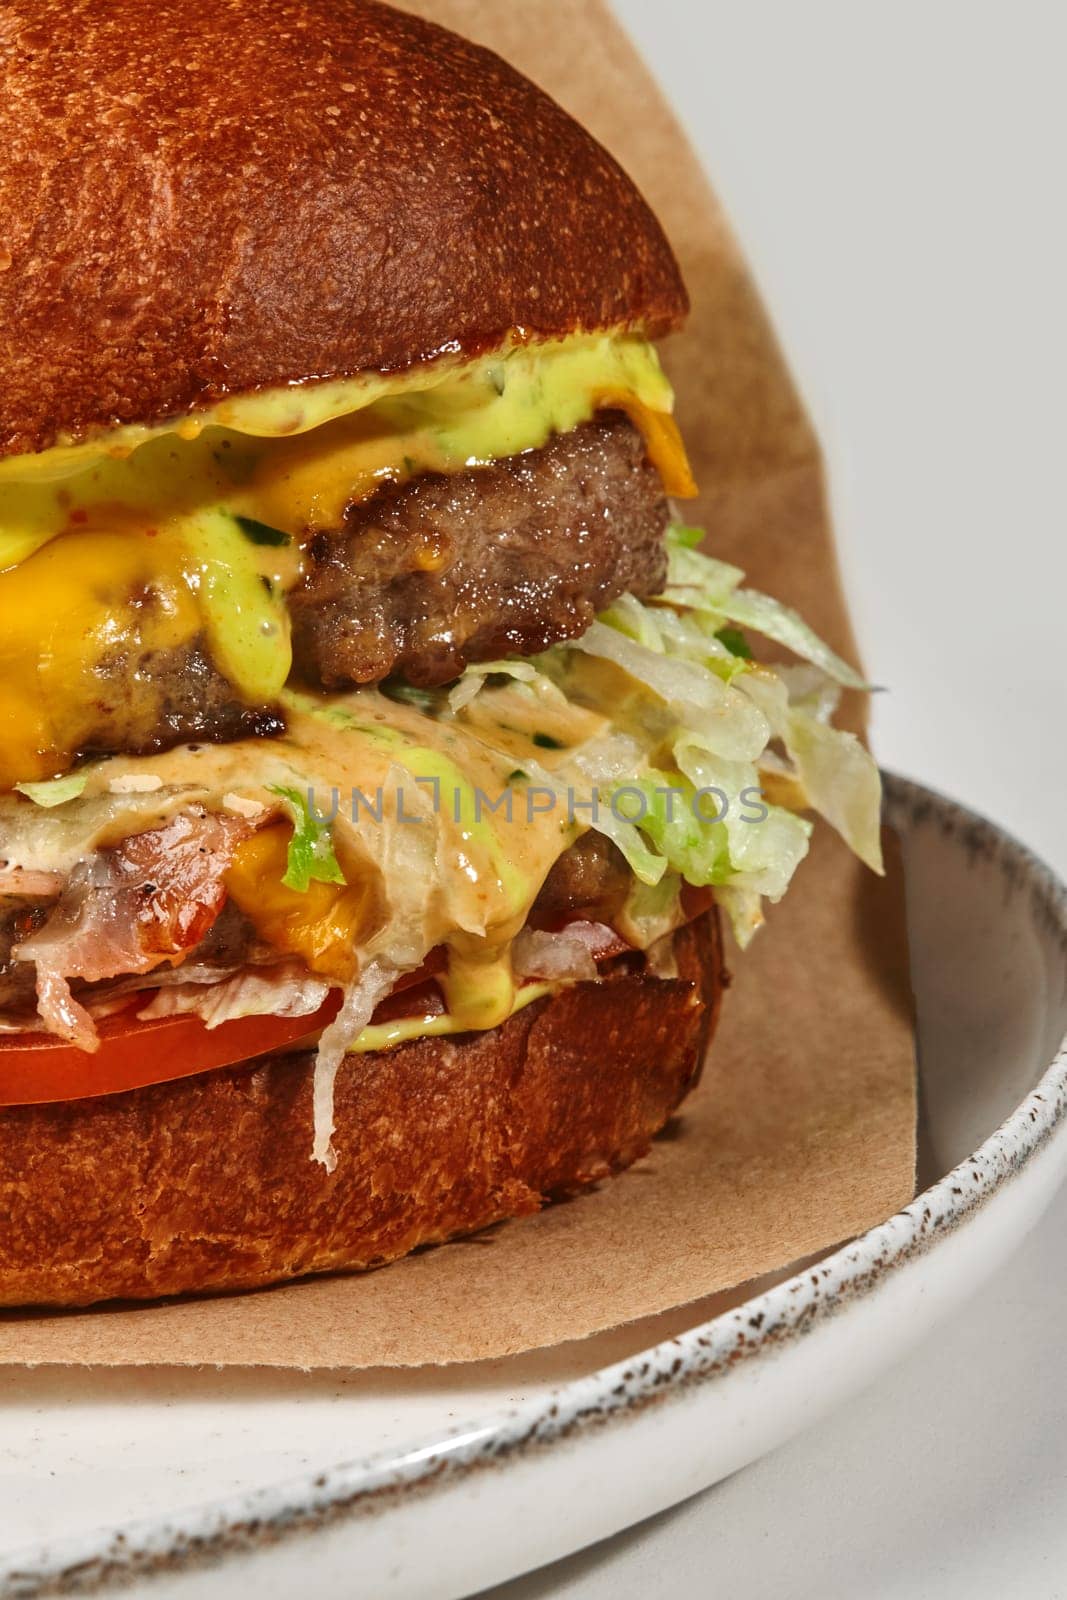 Close-up of delicious double hamburger in fluffy bun with two juicy beef patties, fried bacon slices, fresh tomatoes, lettuce and cheese sauce in craft paper wrapper on plate, against white background